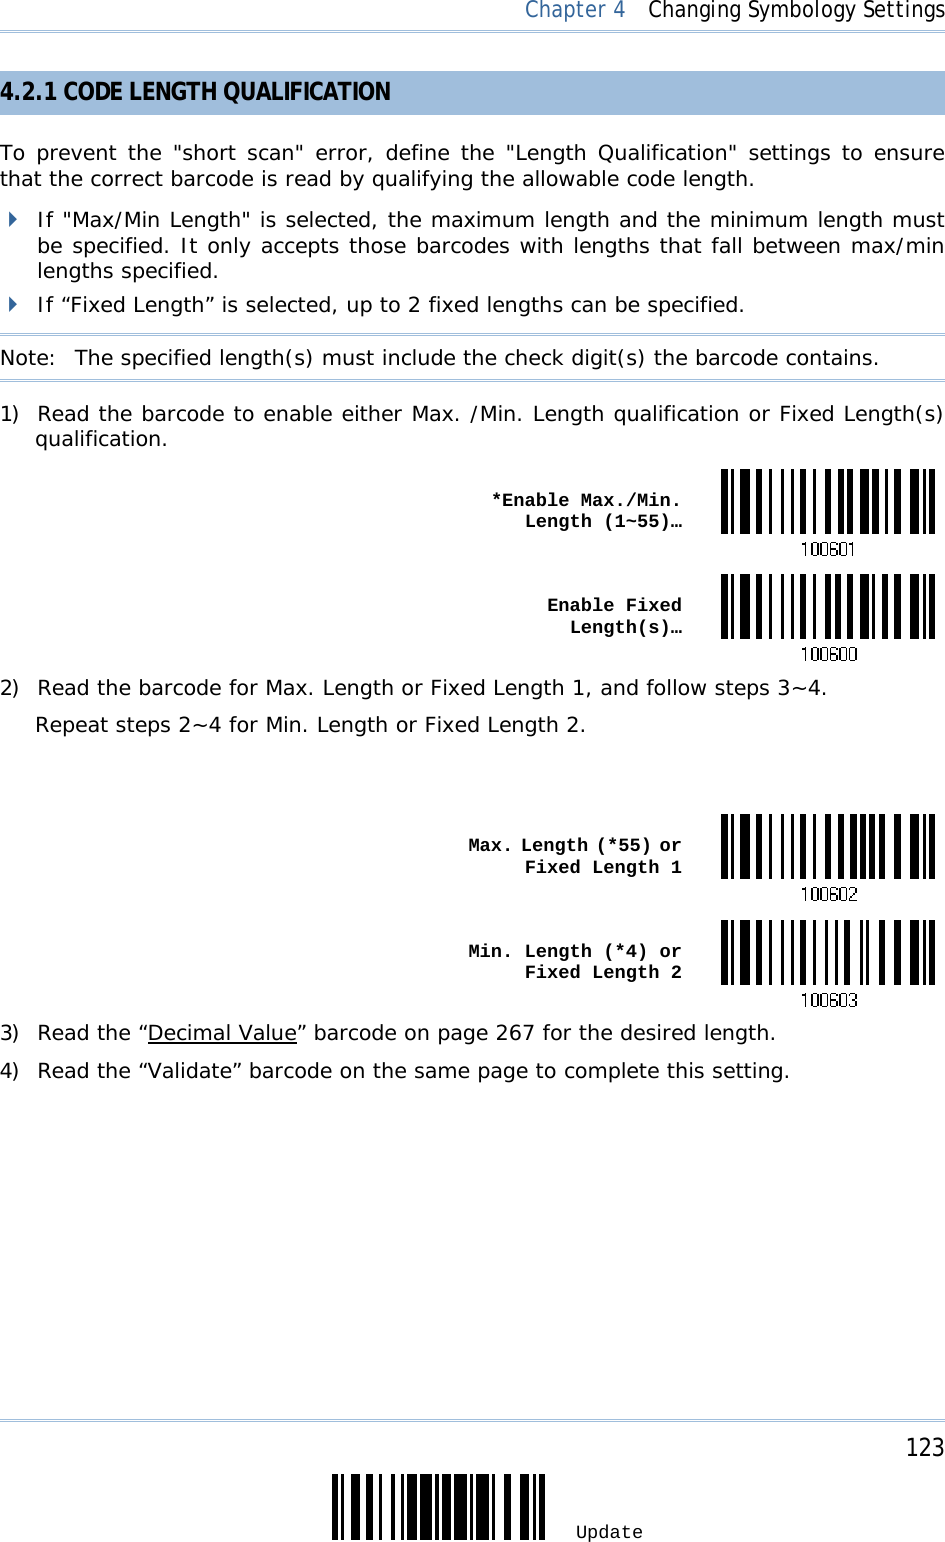     123 Update  Chapter 4  Changing Symbology Settings 4.2.1 CODE LENGTH QUALIFICATION To prevent the &quot;short scan&quot; error, define the &quot;Length Qualification&quot; settings to ensure that the correct barcode is read by qualifying the allowable code length.  If &quot;Max/Min Length&quot; is selected, the maximum length and the minimum length must be specified. It only accepts those barcodes with lengths that fall between max/min lengths specified.  If “Fixed Length” is selected, up to 2 fixed lengths can be specified. Note:   The specified length(s) must include the check digit(s) the barcode contains. 1) Read the barcode to enable either Max. /Min. Length qualification or Fixed Length(s) qualification.  *Enable Max./Min. Length (1~55)… Enable Fixed Length(s)…2) Read the barcode for Max. Length or Fixed Length 1, and follow steps 3~4. Repeat steps 2~4 for Min. Length or Fixed Length 2.    Max. Length (*55) or Fixed Length 1 Min. Length (*4) or Fixed Length 23) Read the “Decimal Value” barcode on page 267 for the desired length.  4) Read the “Validate” barcode on the same page to complete this setting. 